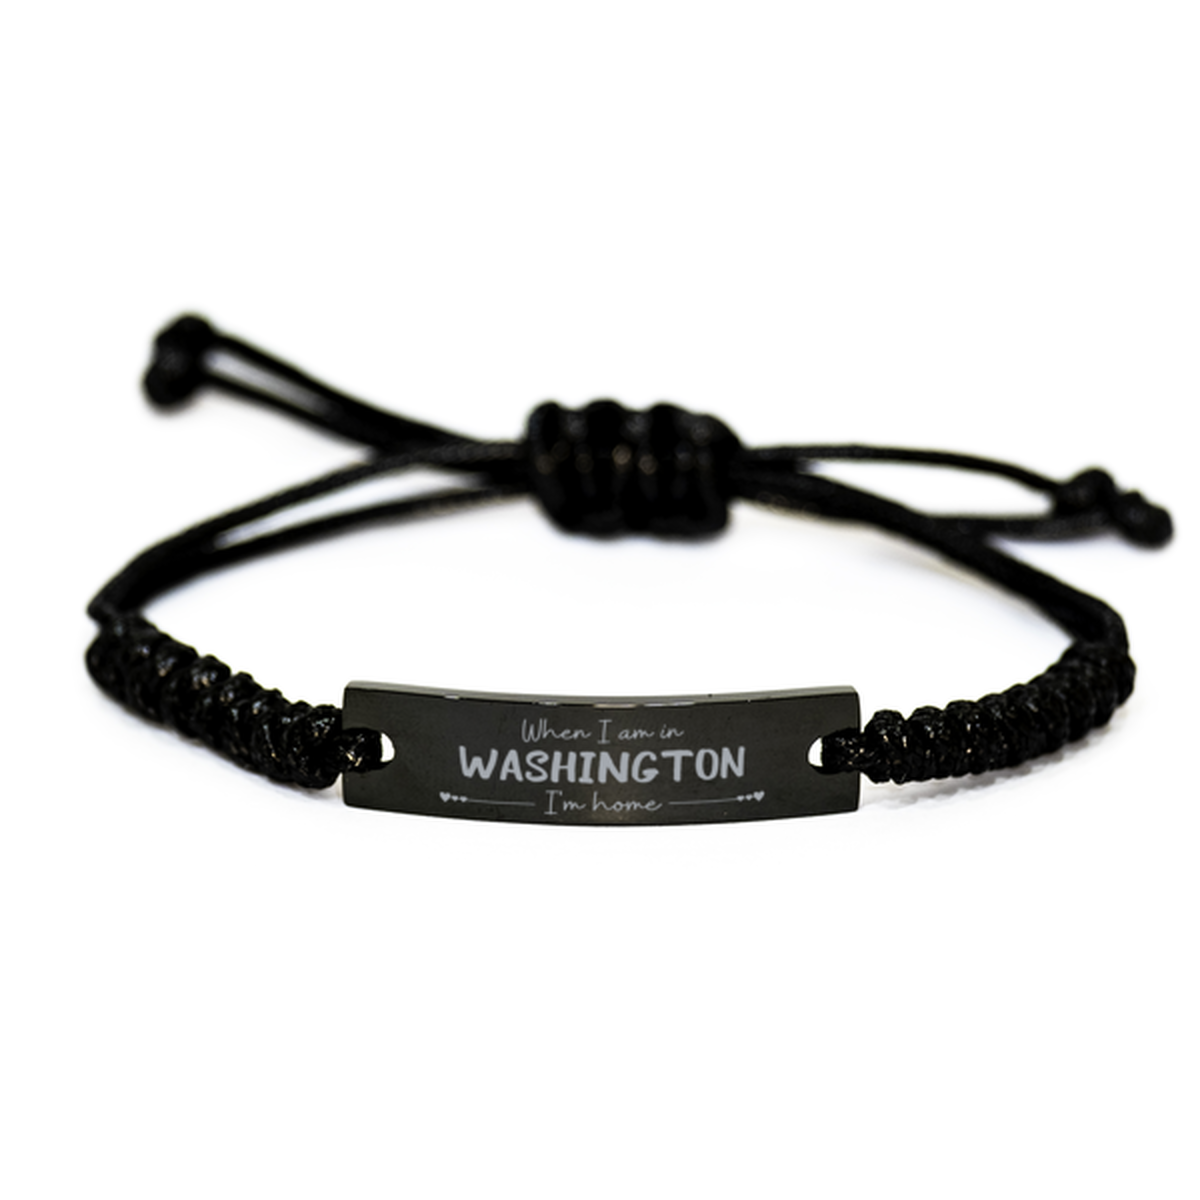 When I am in Washington I'm home Black Rope Bracelet, Cheap Gifts For Washington, State Washington Birthday Gifts for Friends Coworker